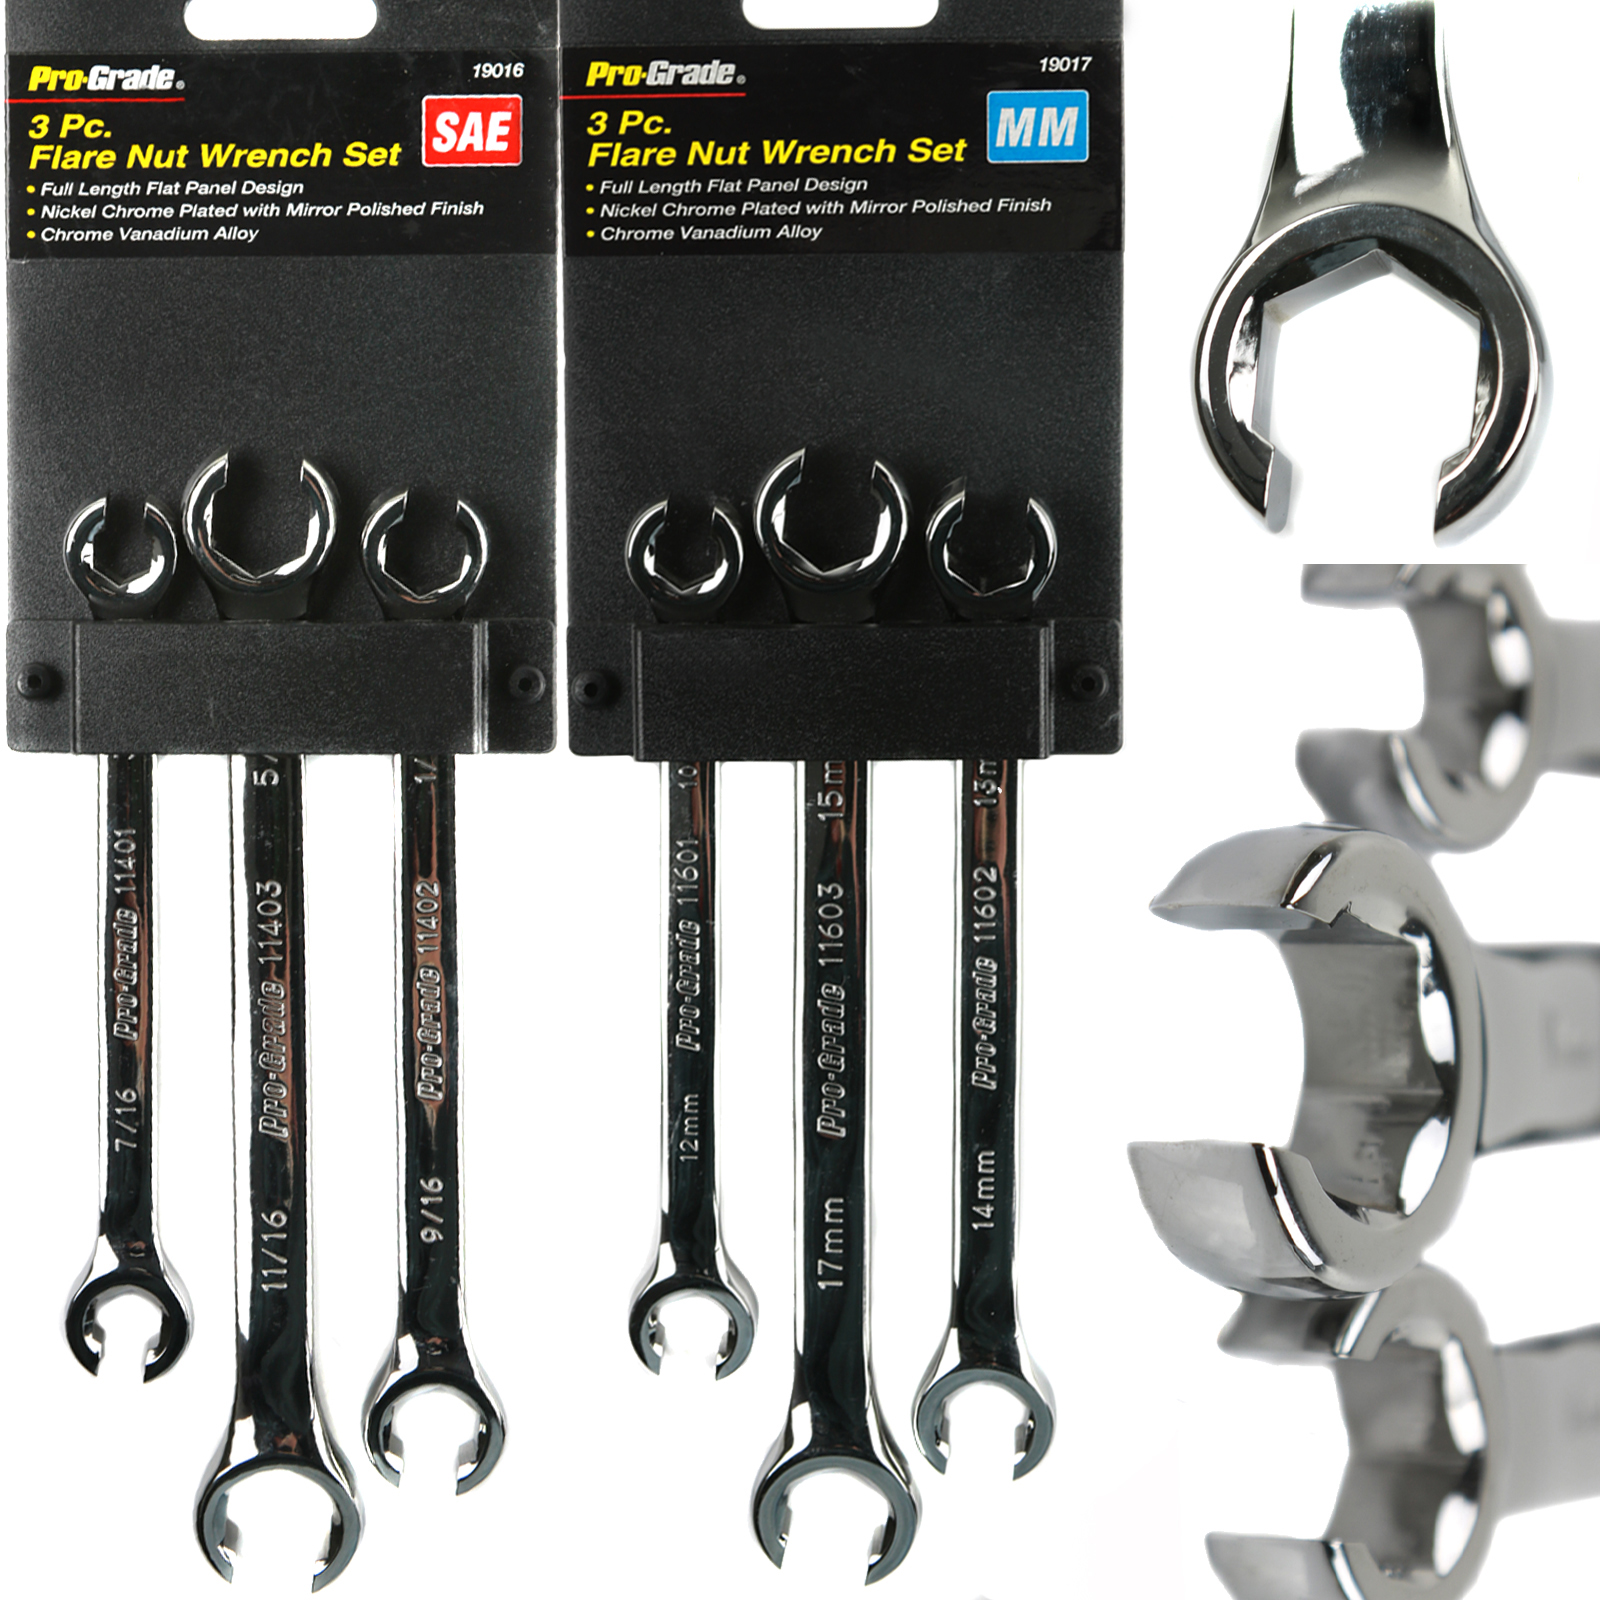 Pro-Grade 6pc. Flare Nut Line Wrench Set